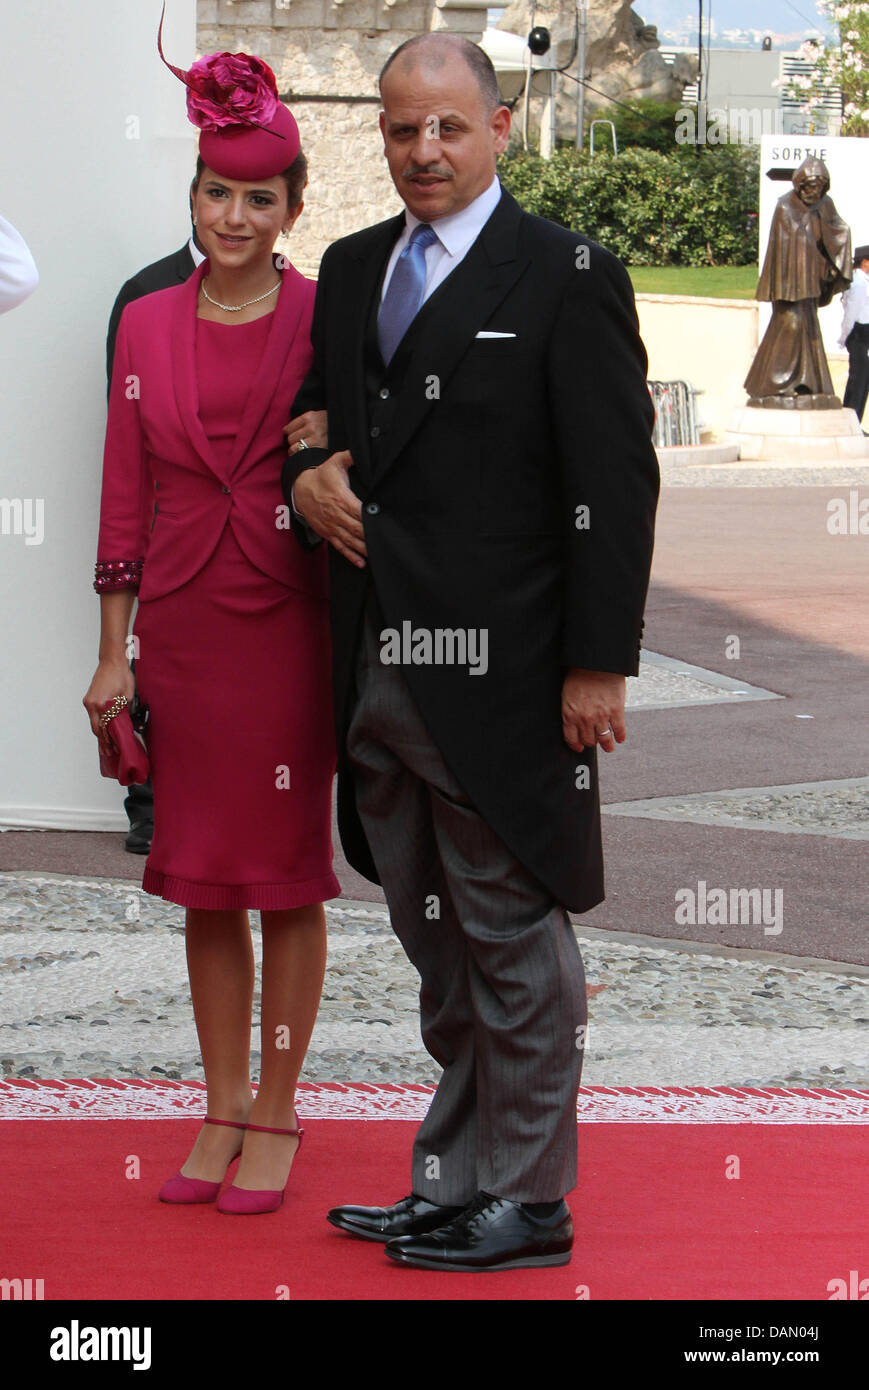 Prince Faisal bin al Hussein of Jordan arrives with his wife Sara Qabbani  for the religious wedding of Prince Albert II and Princess Charlene in the  Prince's Palace in Monaco, 02 July